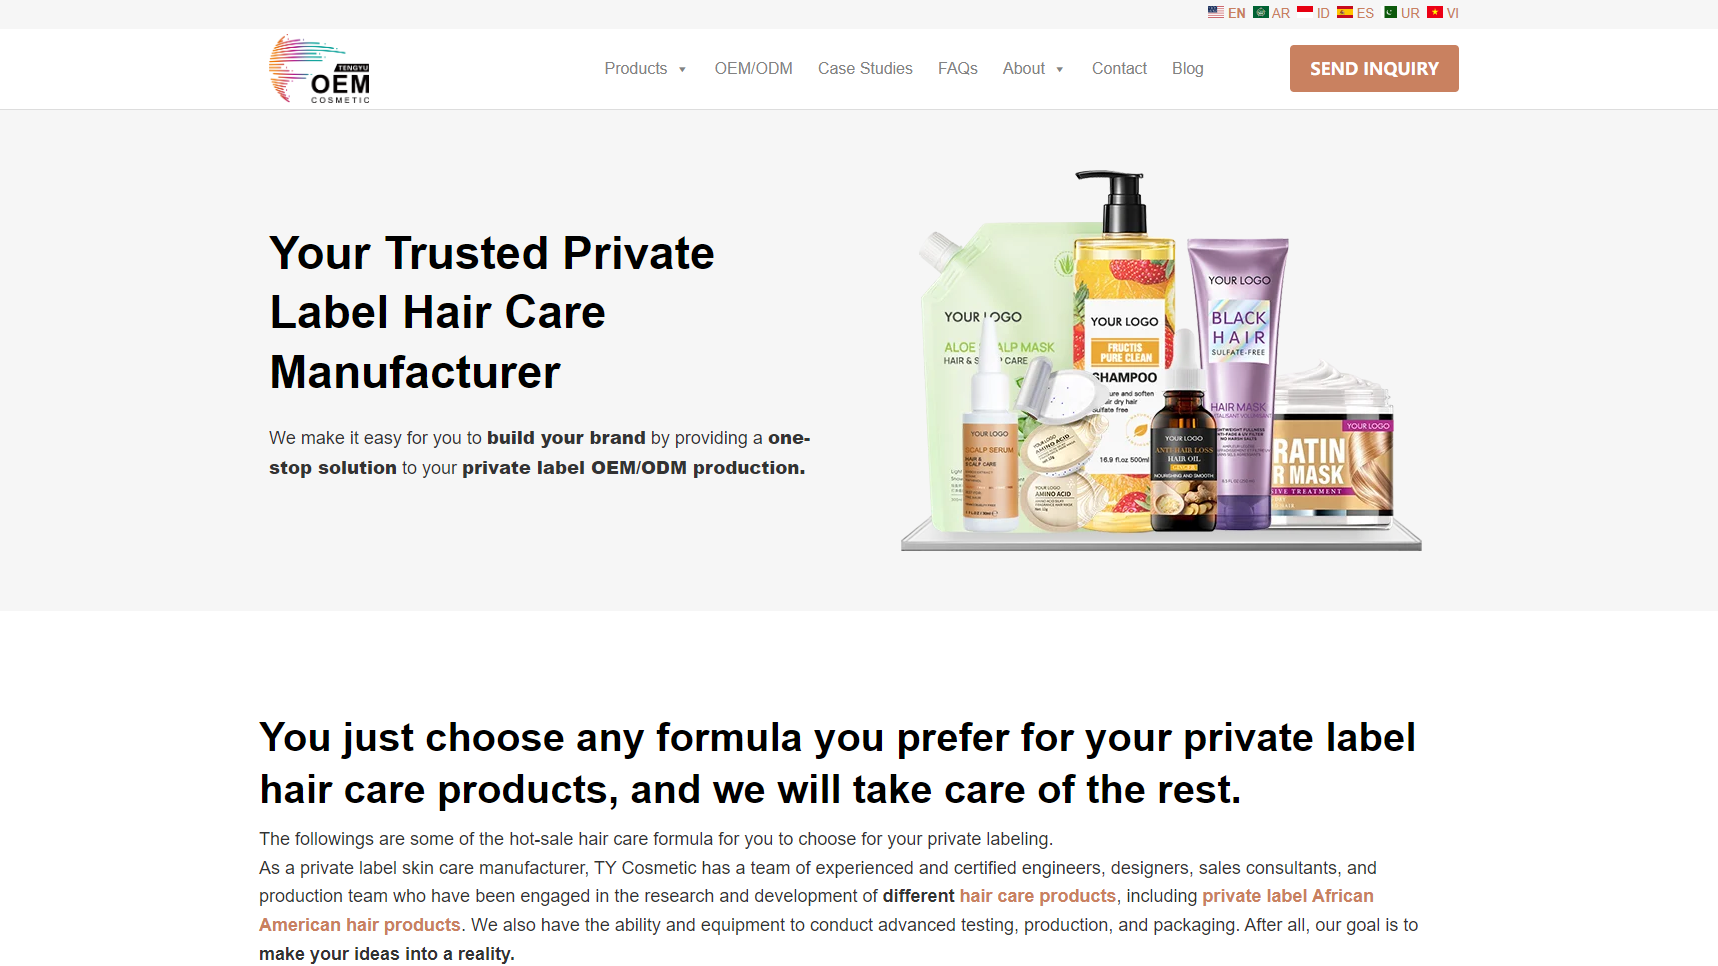 TY OEM Cosmetic - Hair Care Manufacturer